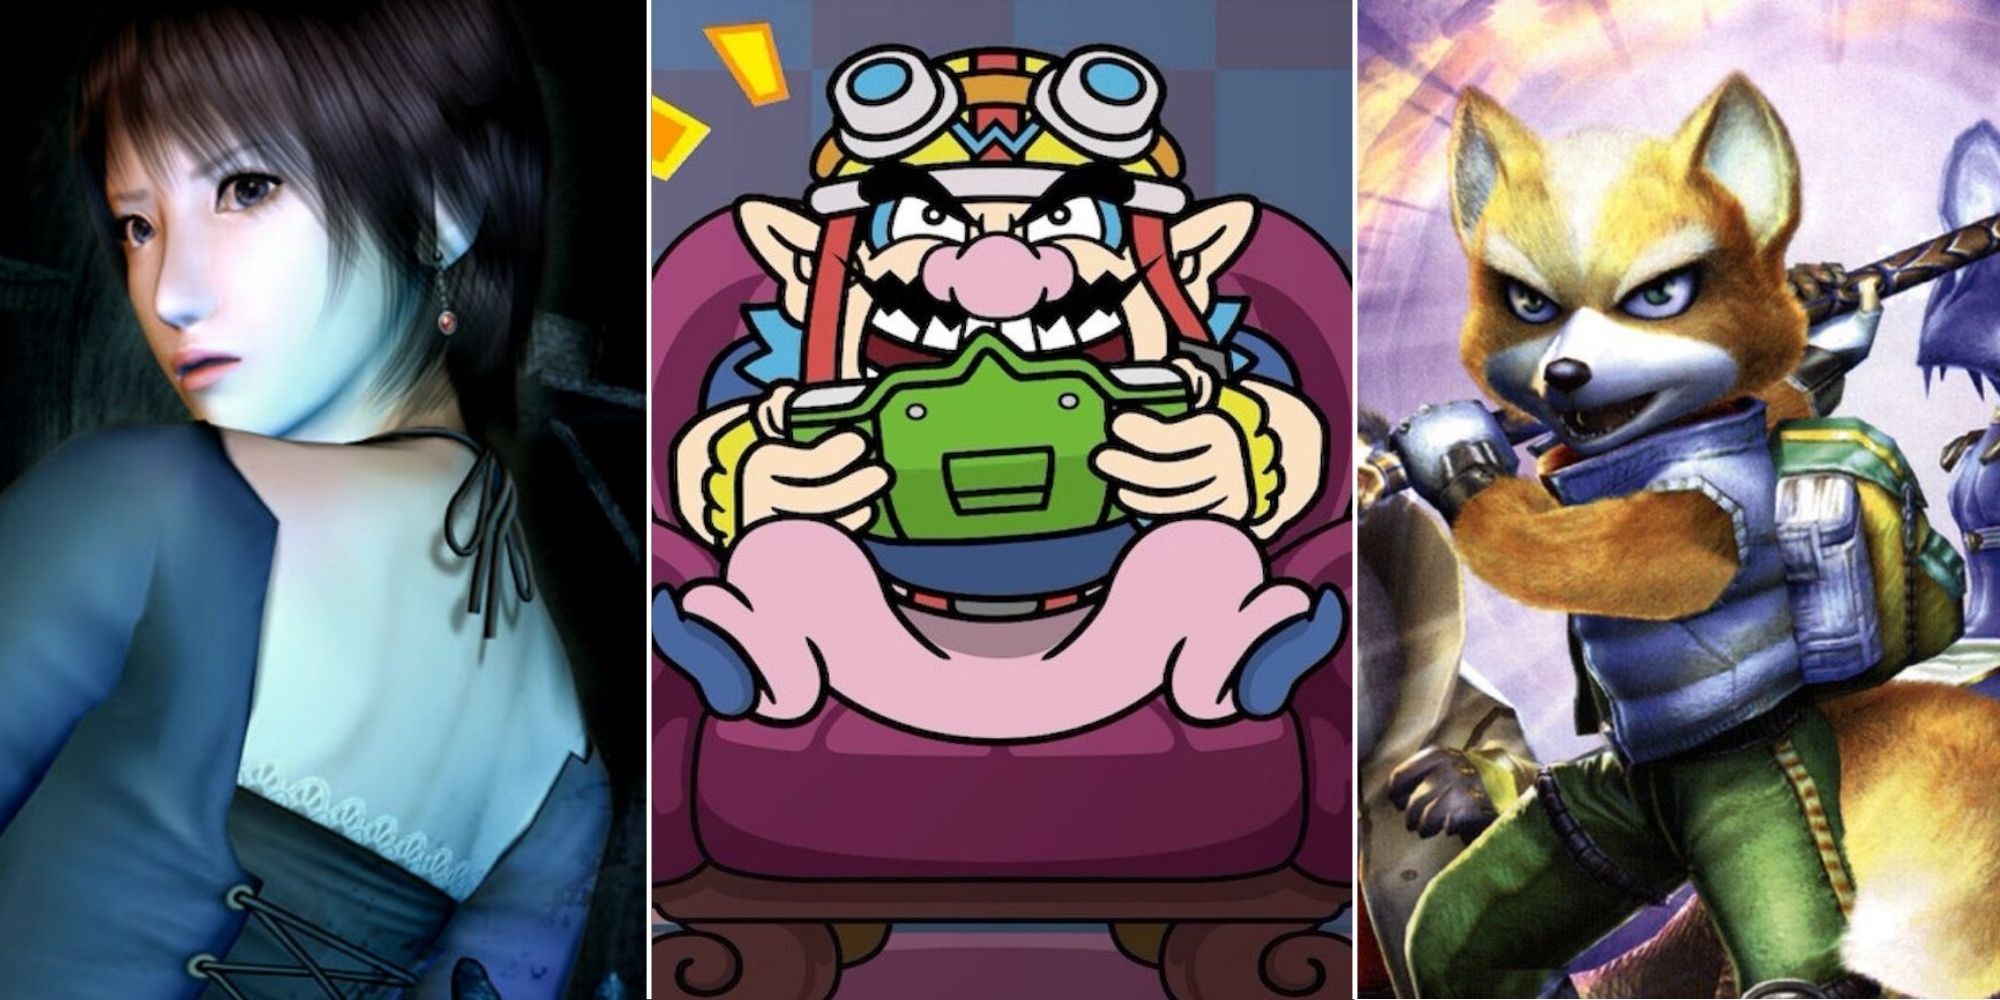 Collage image of Fatal frame, Warioware and Starfox assault